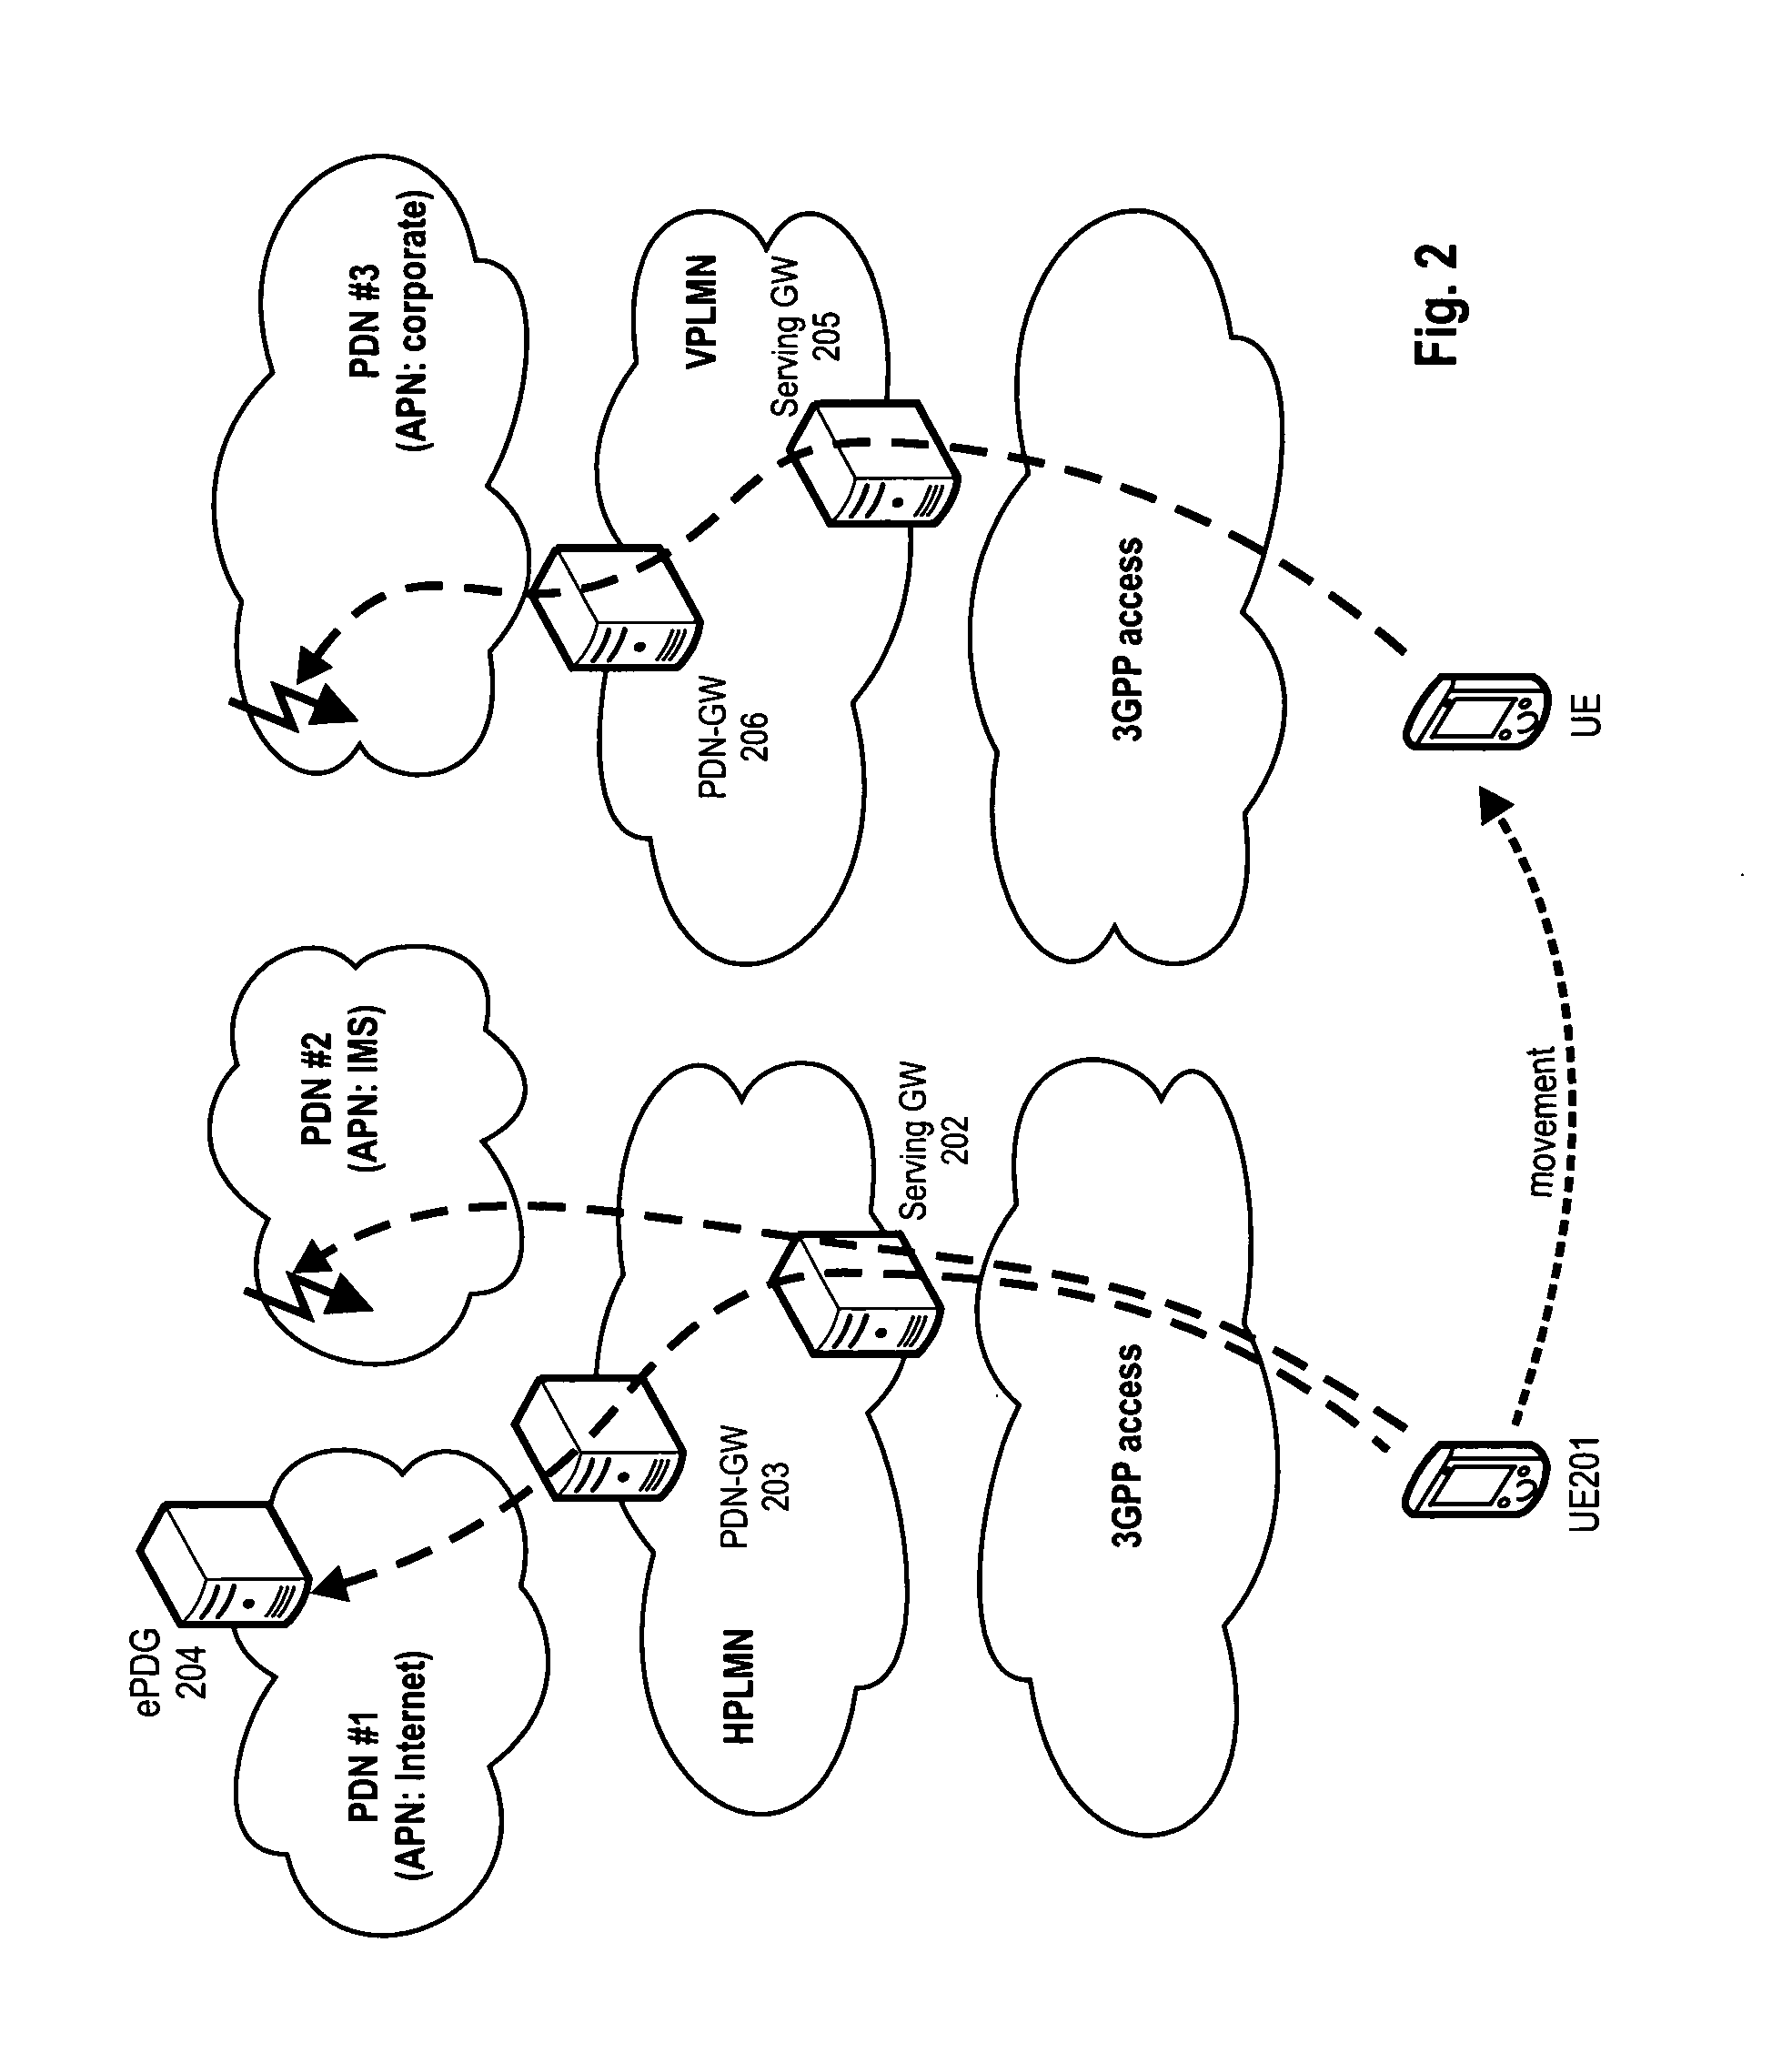 Secure tunnel establishment upon attachment or handover to an access network